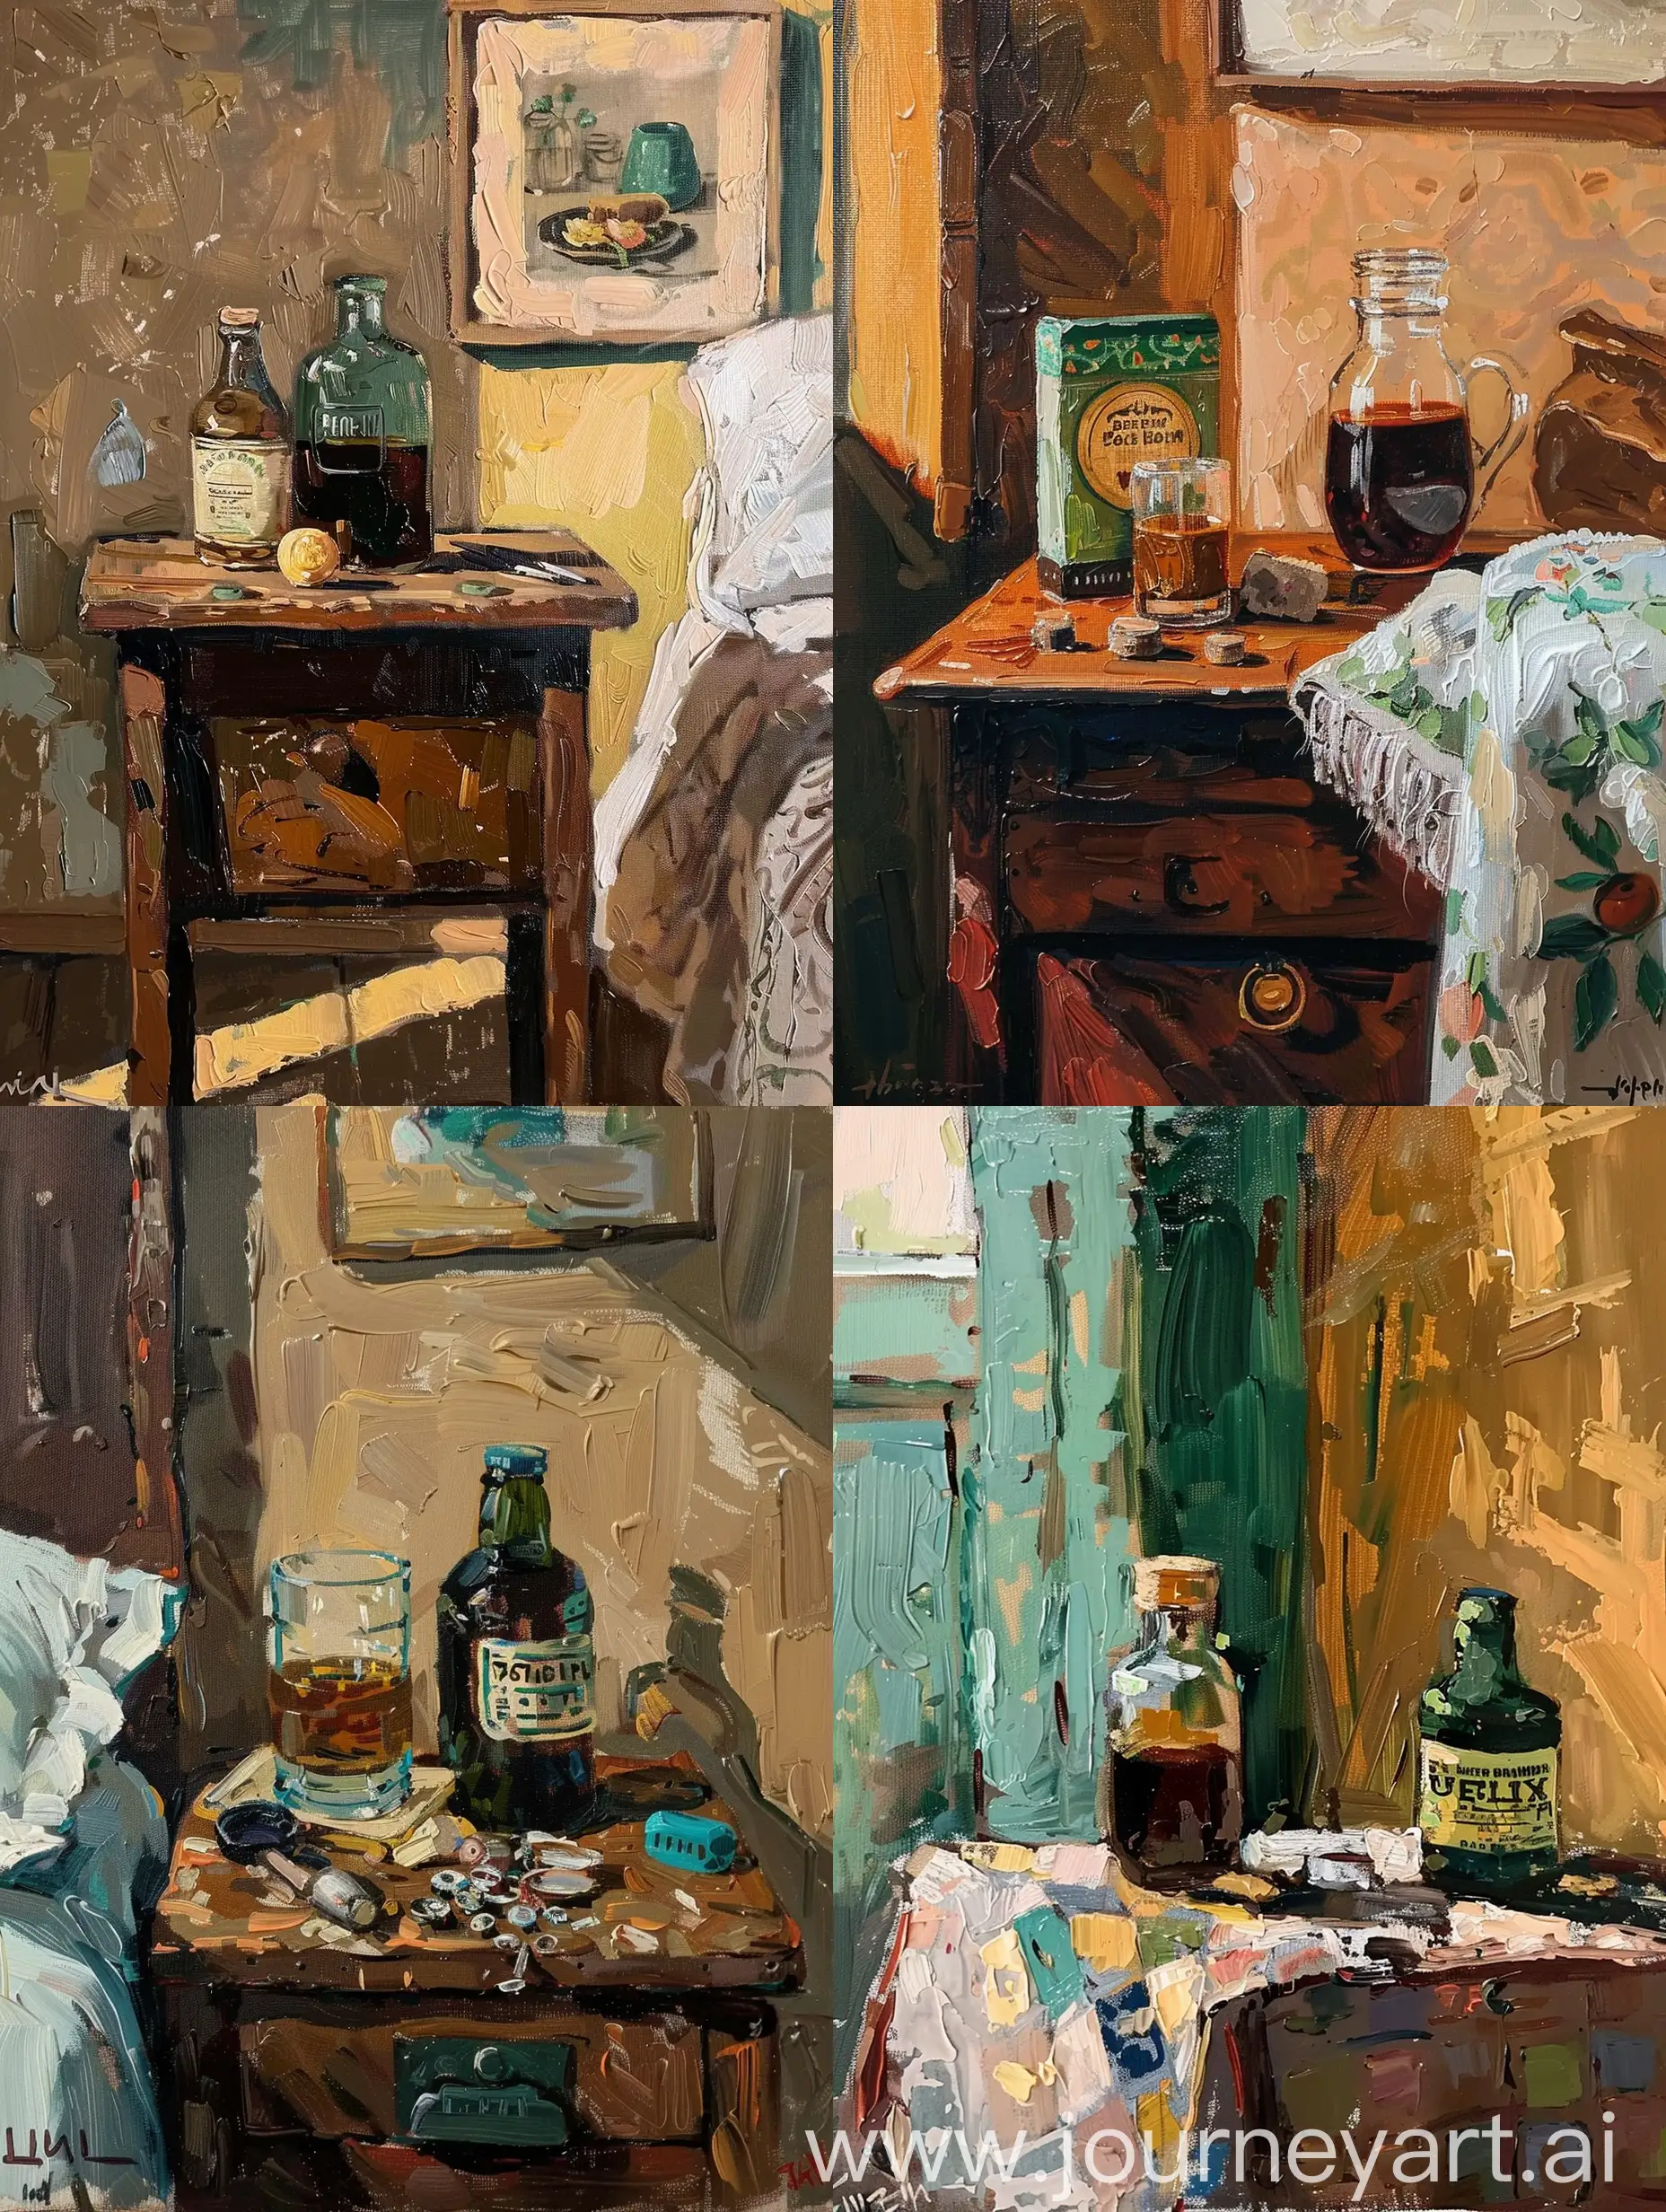 live scene oil painting of a table by the bedside with random items on it